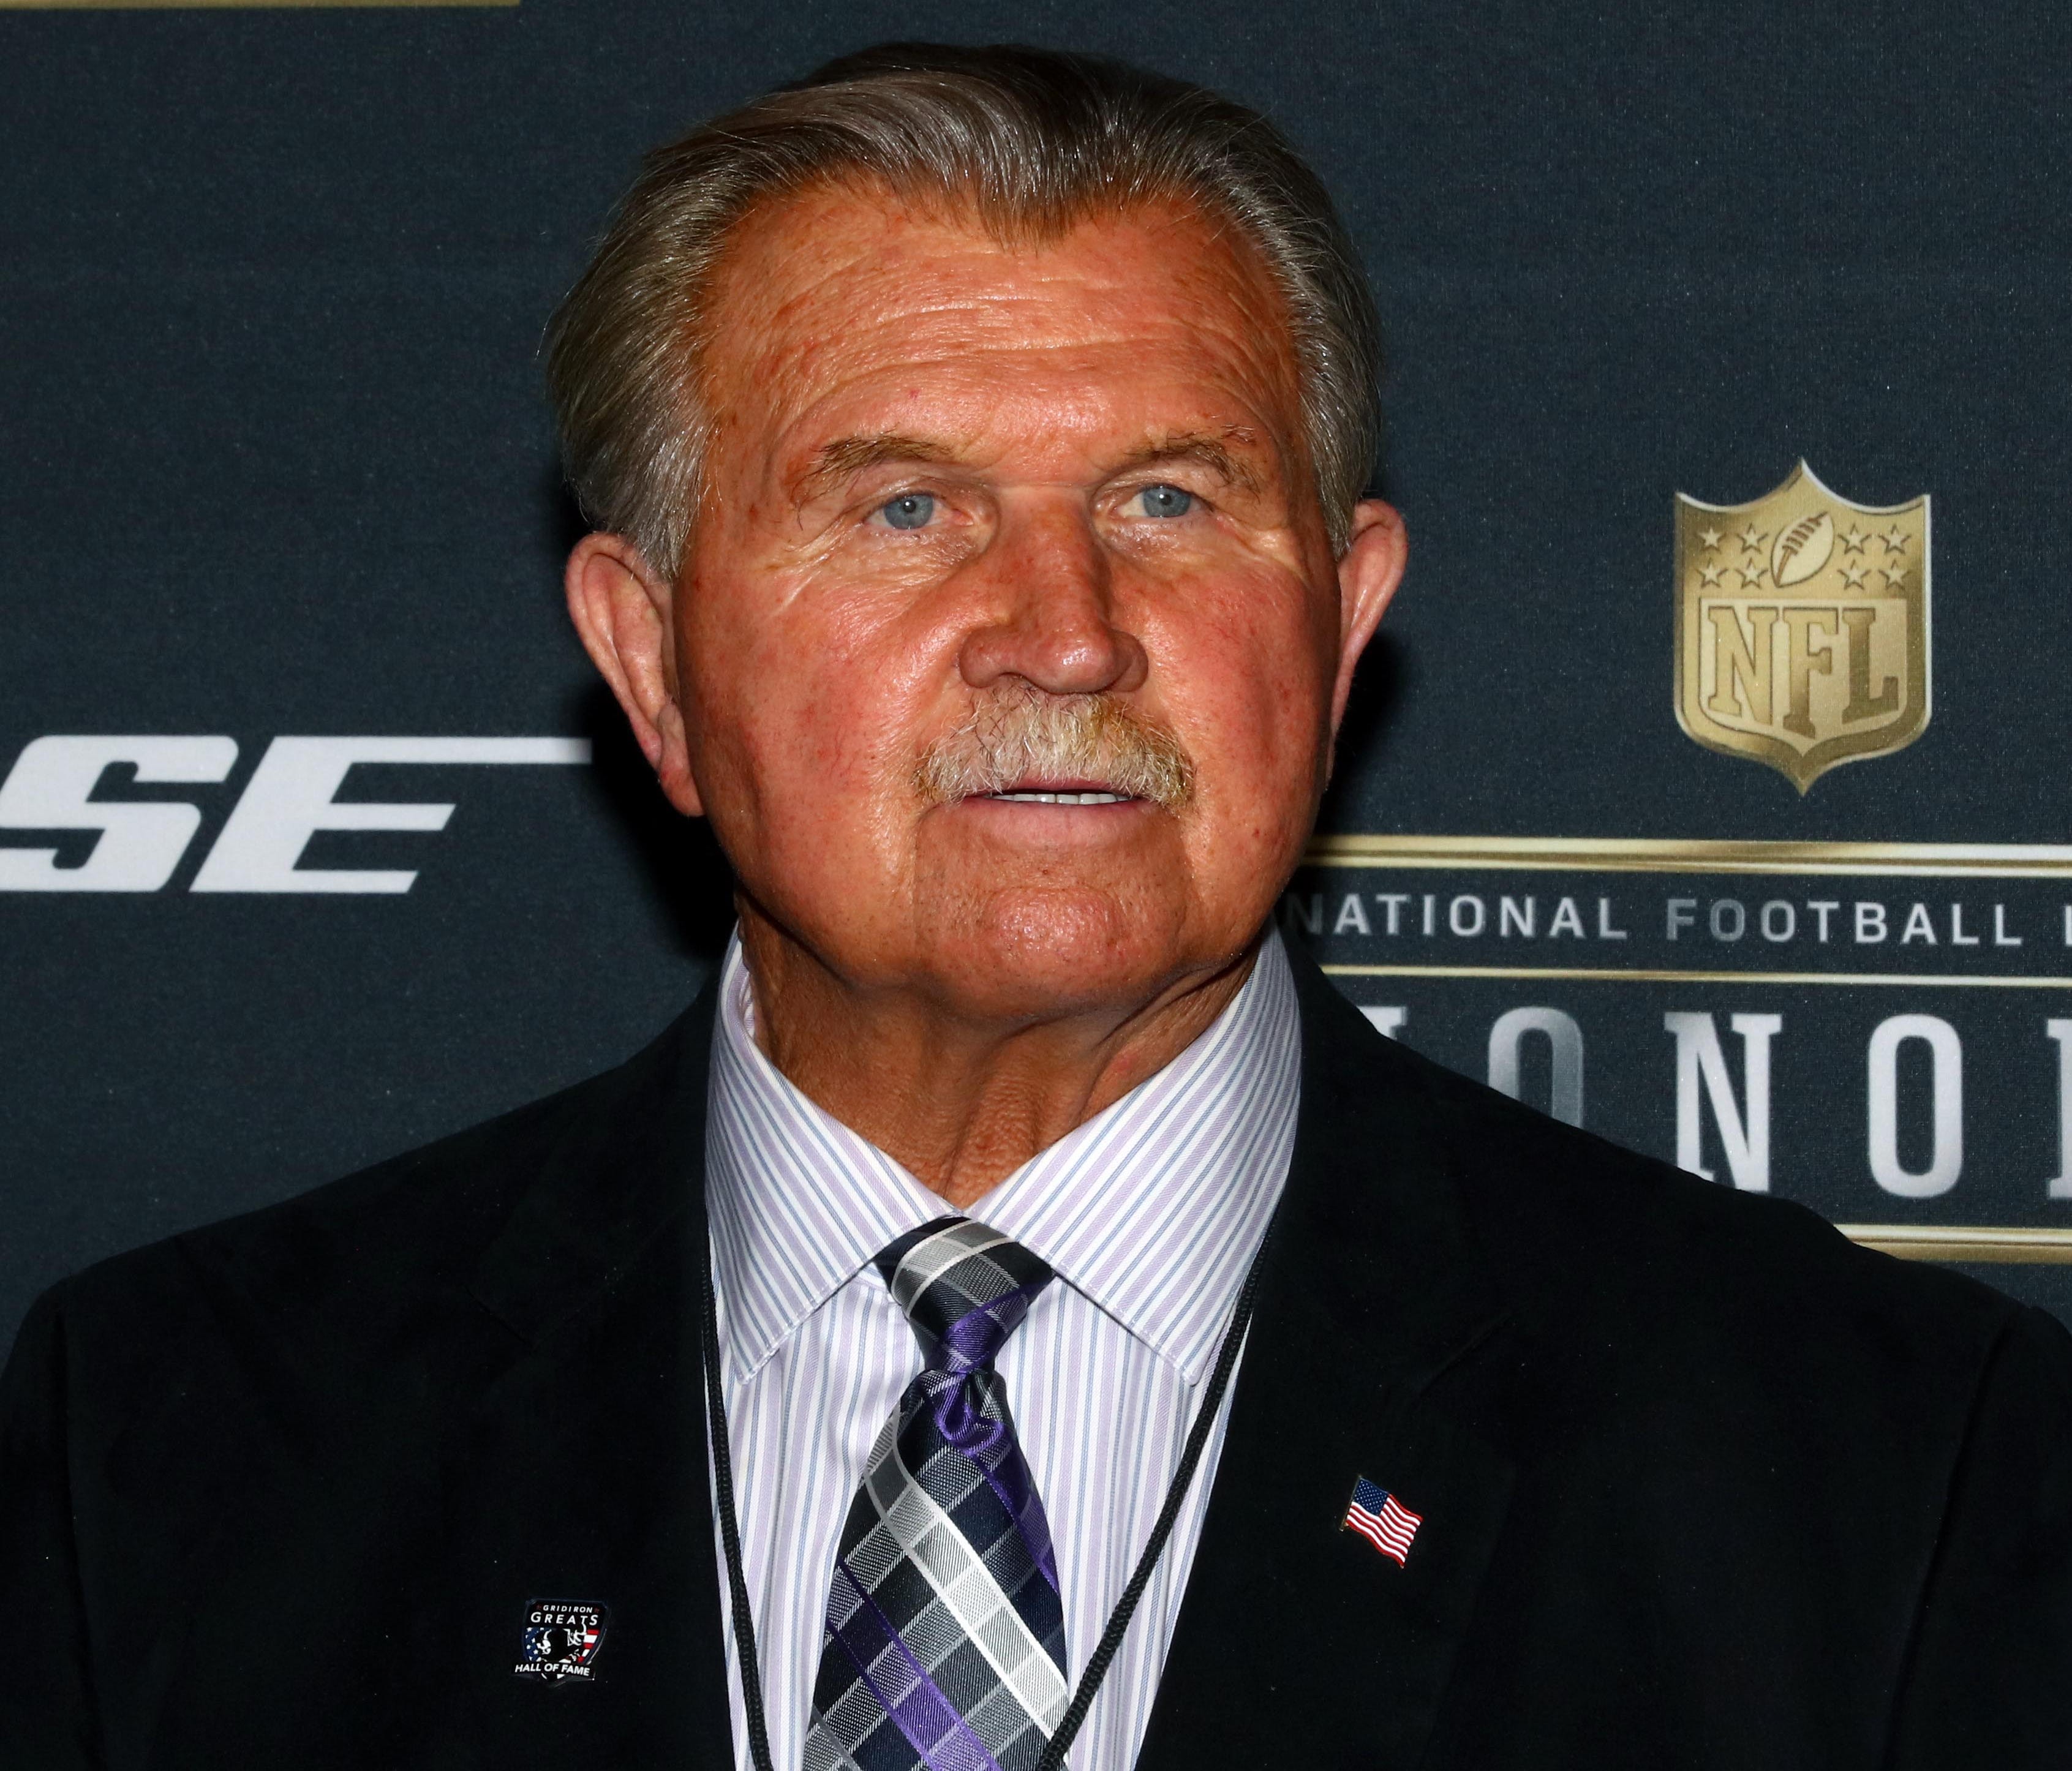 Mike Ditka on the red carpet prior to the NFL Honors award ceremony at Bill Graham Civic Auditorium.